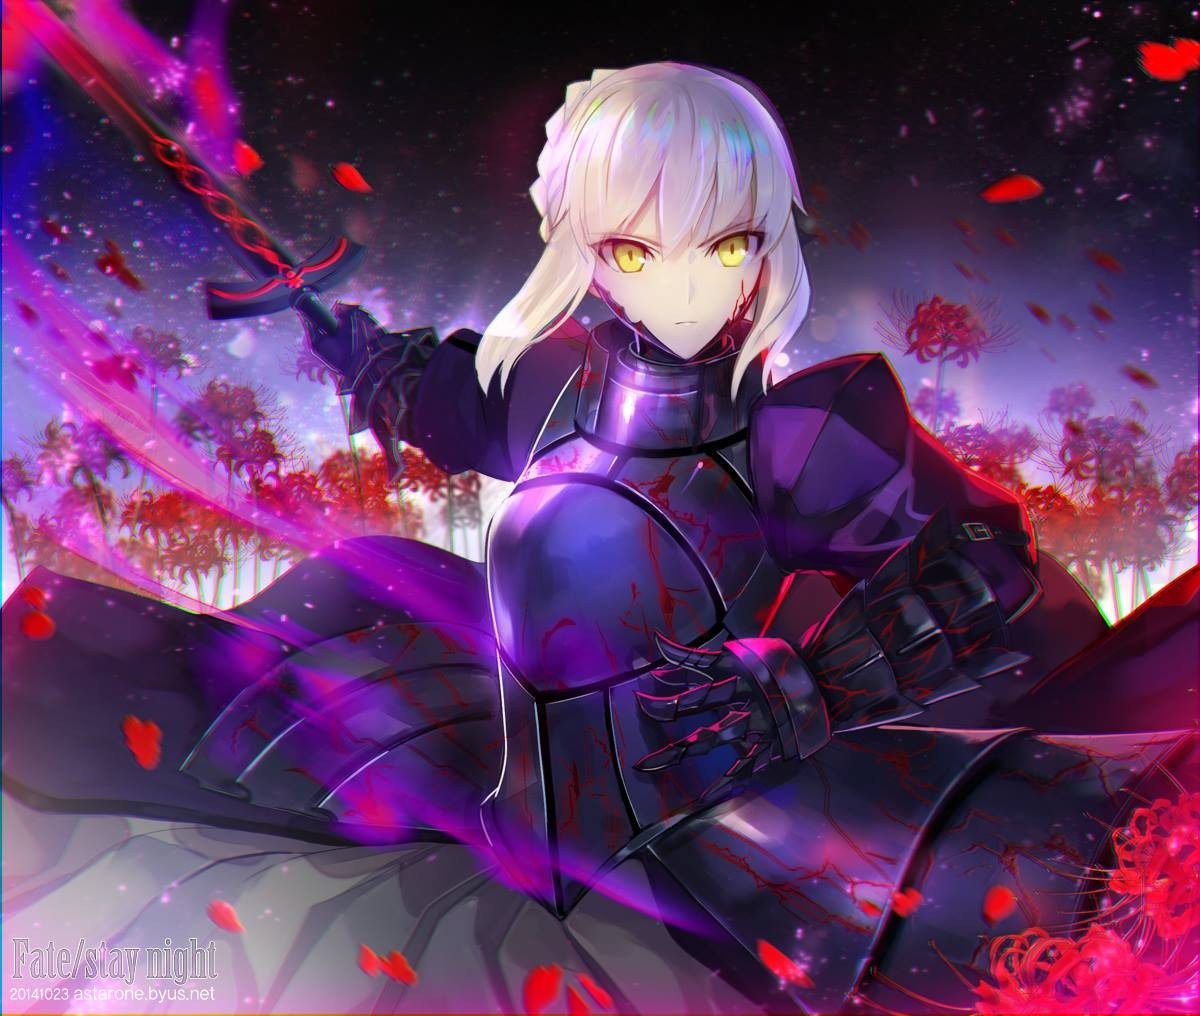 Saber Alter Fate Stay Night Anime girls Fate Series HD Wallpapers   Desktop and Mobile Images  Photos